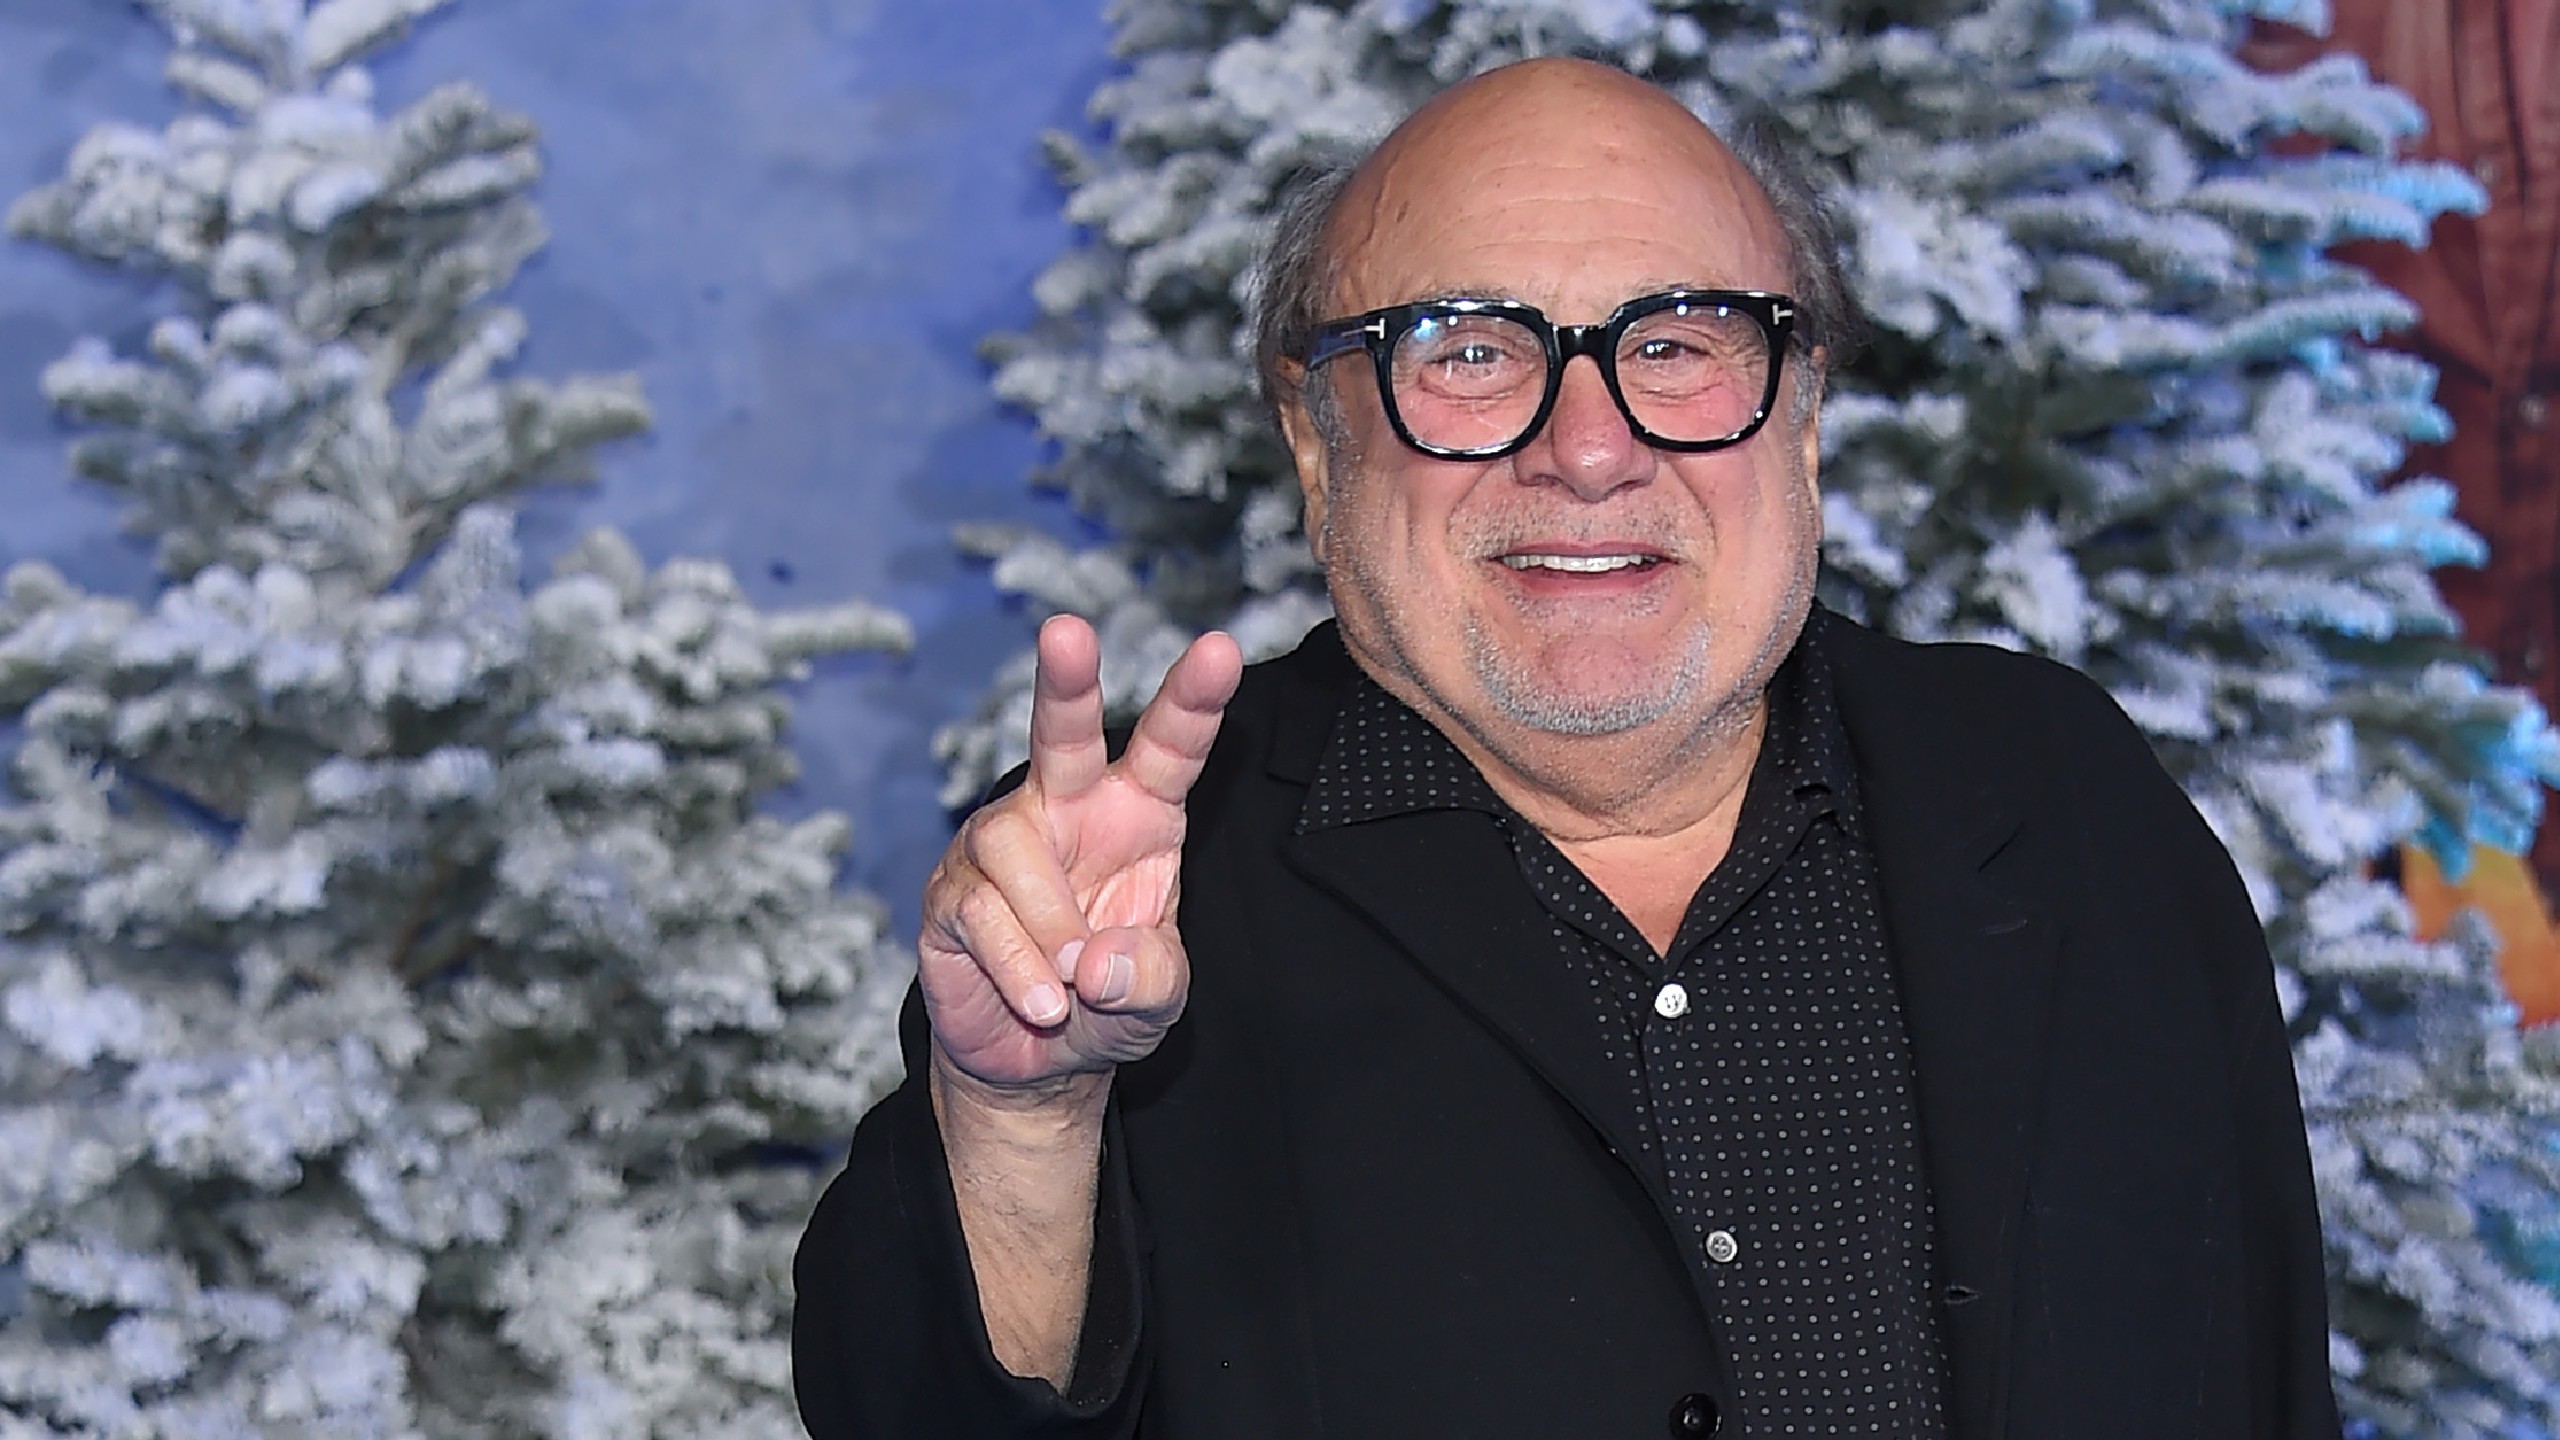 Disney’s Haunted Mansion Reboot Welcomes Danny Devito To Star-Studded Cast